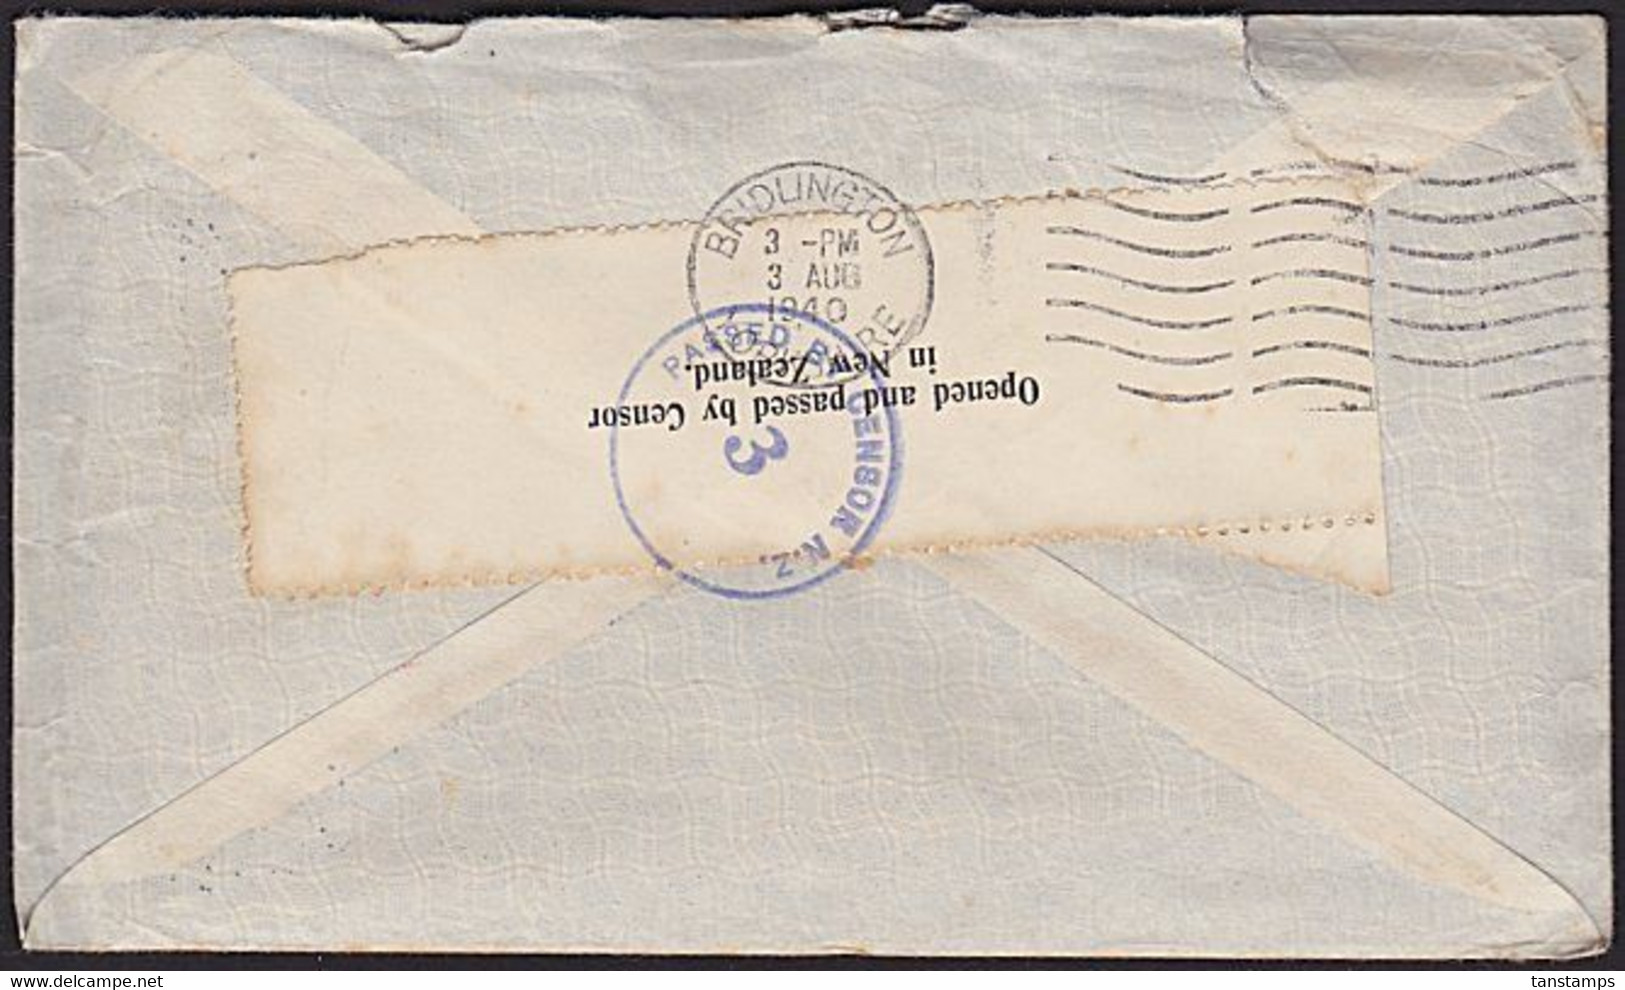 NEW ZEALAND - ENGLAND WWII 6/3 AIRMAIL RATE USING 6s ARMS REVENUE PASSED BY CENSOR 3 FIRST FLIGHT COVER - Covers & Documents